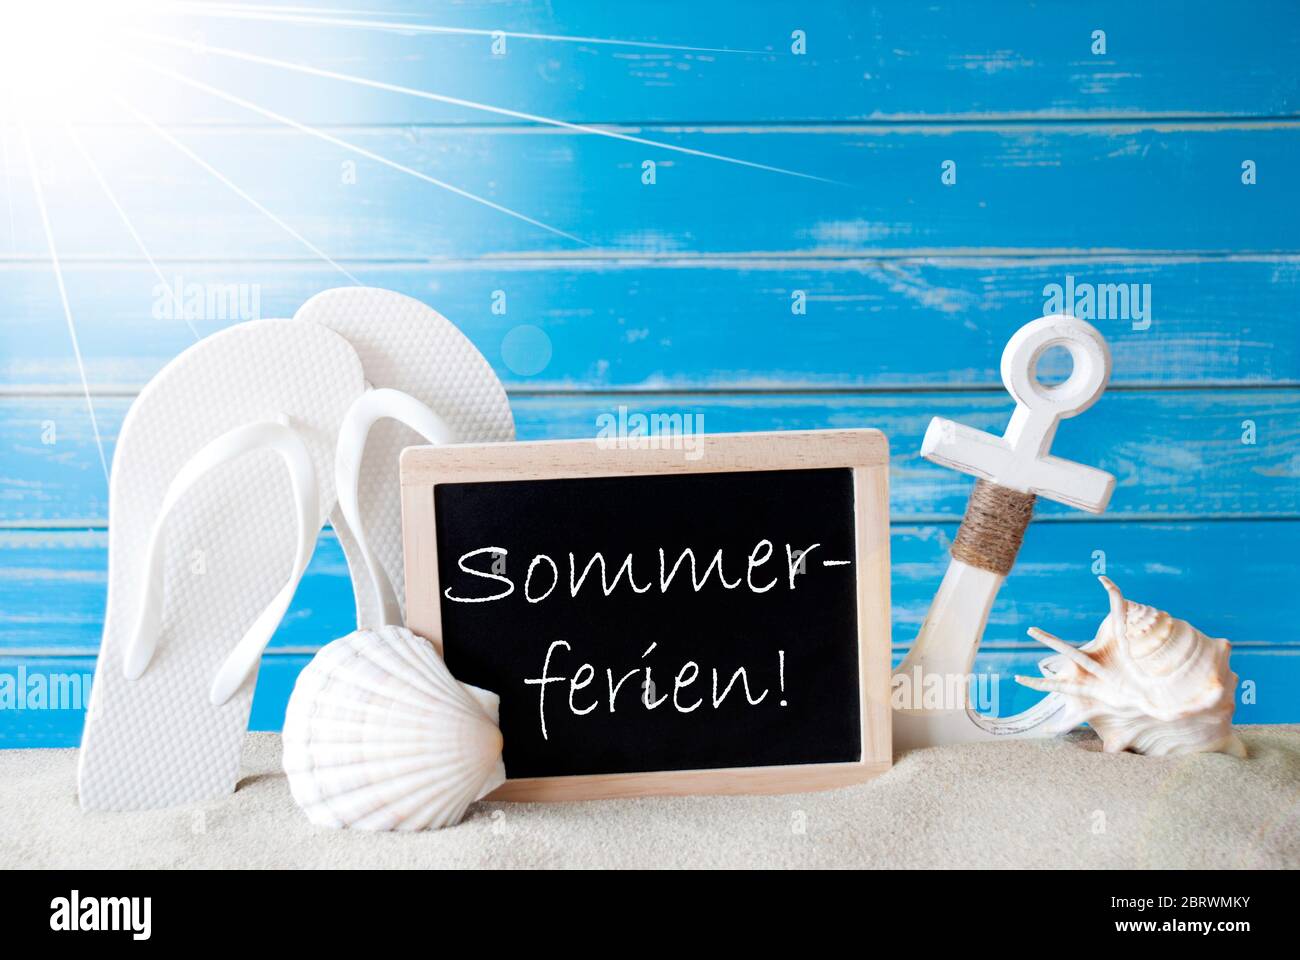 Chalkboard With German Text Sommerferien Means Summer Holidays. Blue Wooden Background. Sunny Summer Card With Holiday Greetings. Beach Vacation Symbo Stock Photo